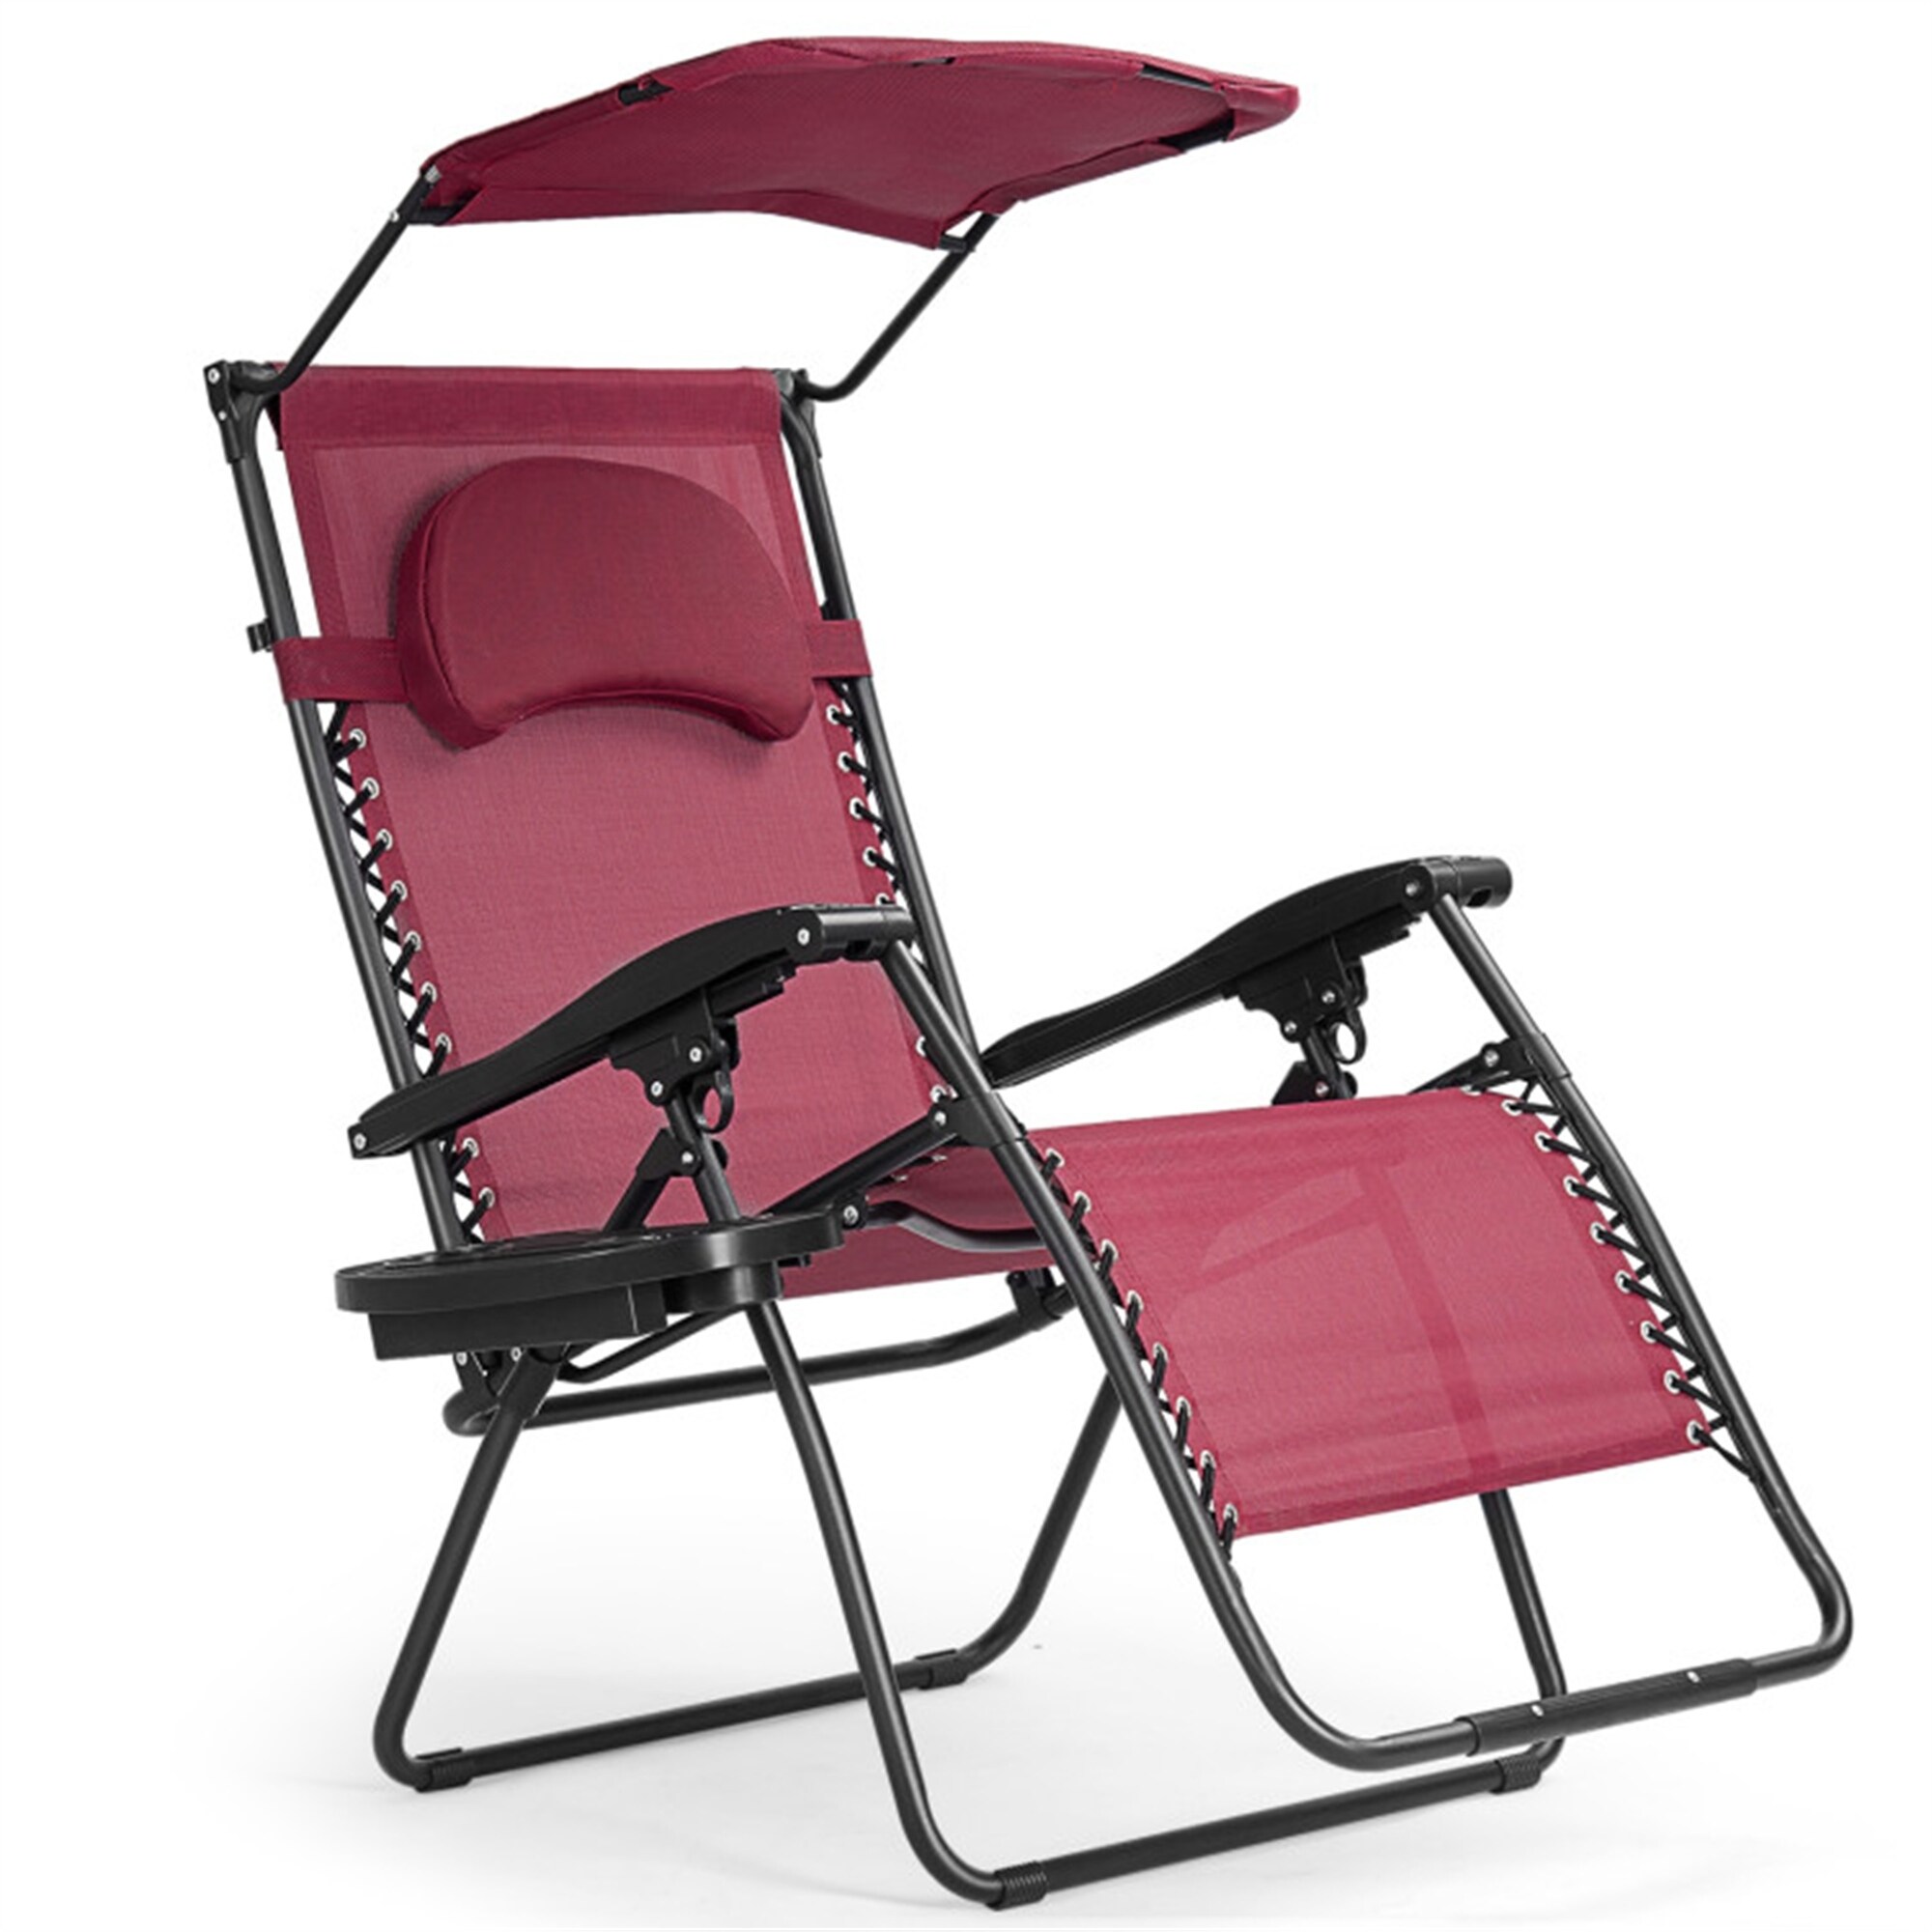 Single Folding Shade Canopy Cup Holder Recliner Lounge Chair